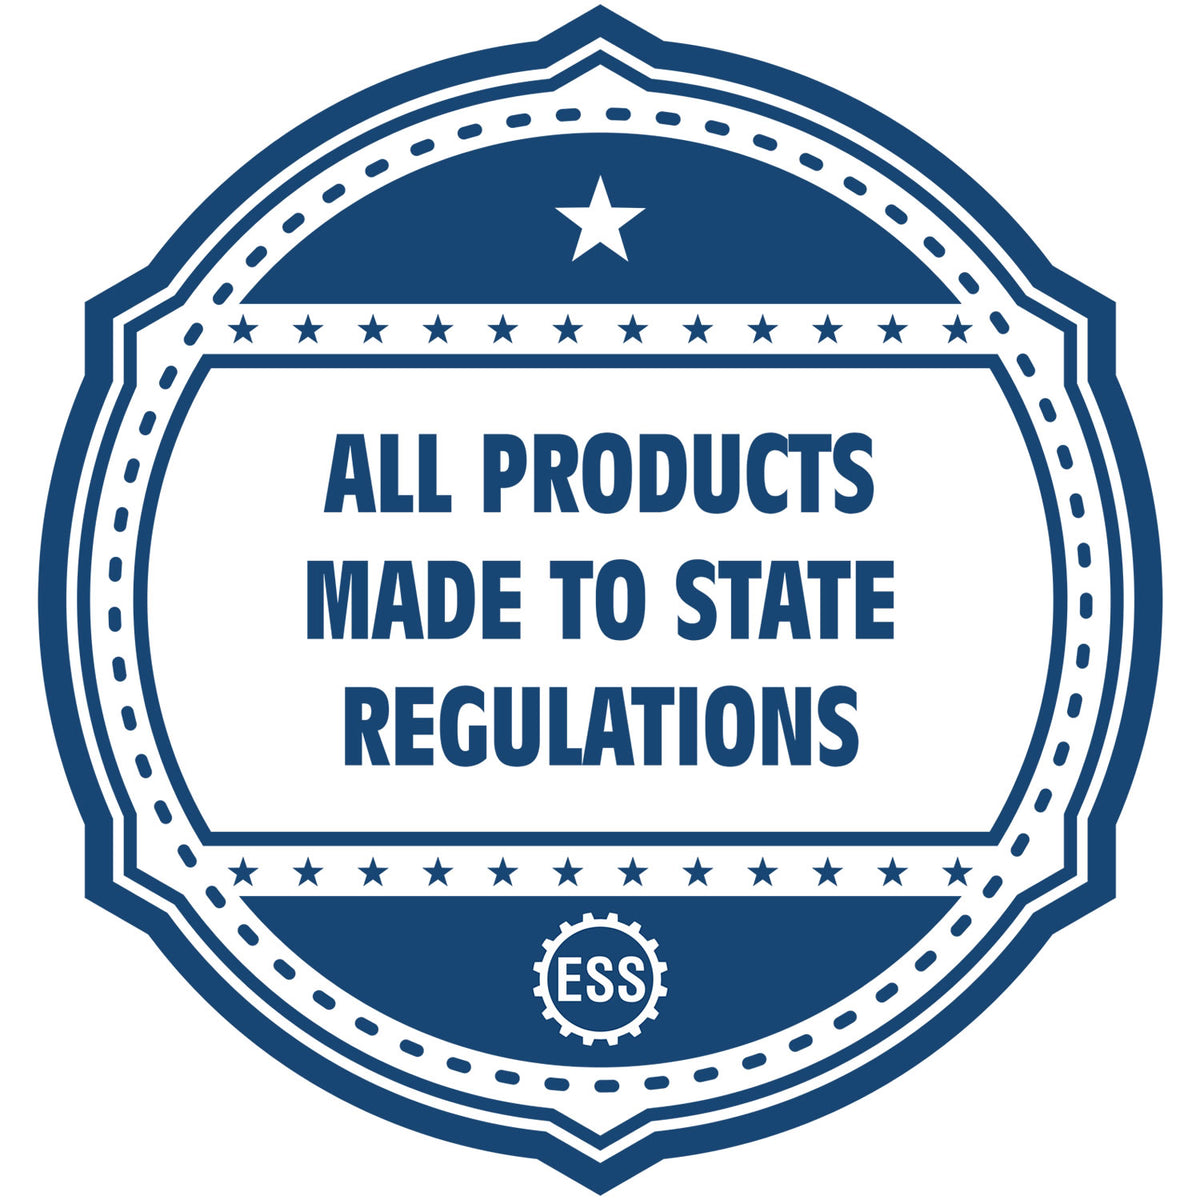 An icon or badge element for the State of Utah Extended Long Reach Engineer Seal showing that this product is made in compliance with state regulations.